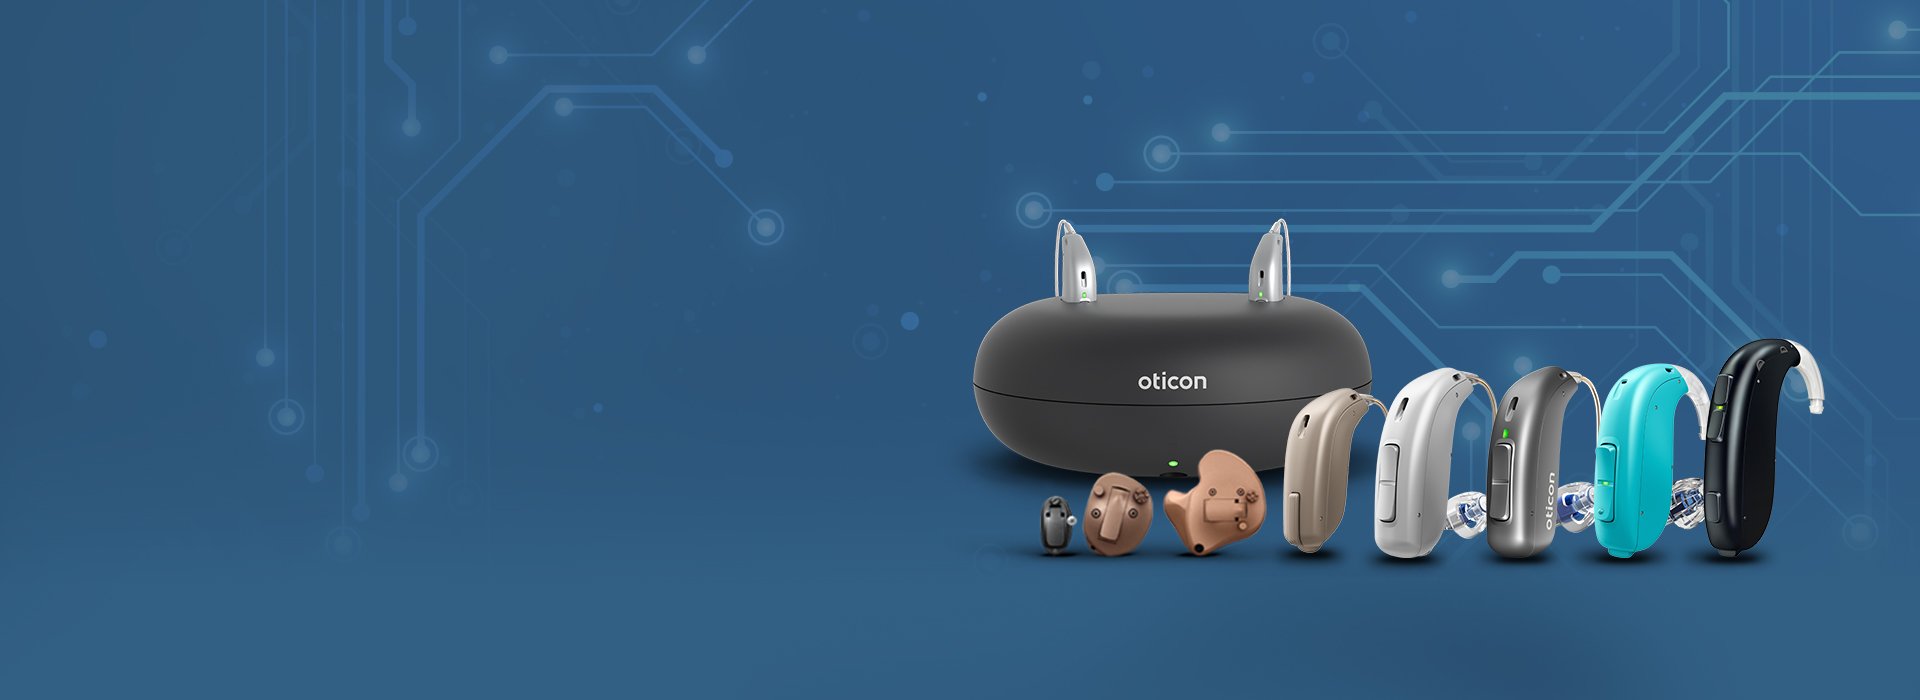 Oticon hearing aid in hand